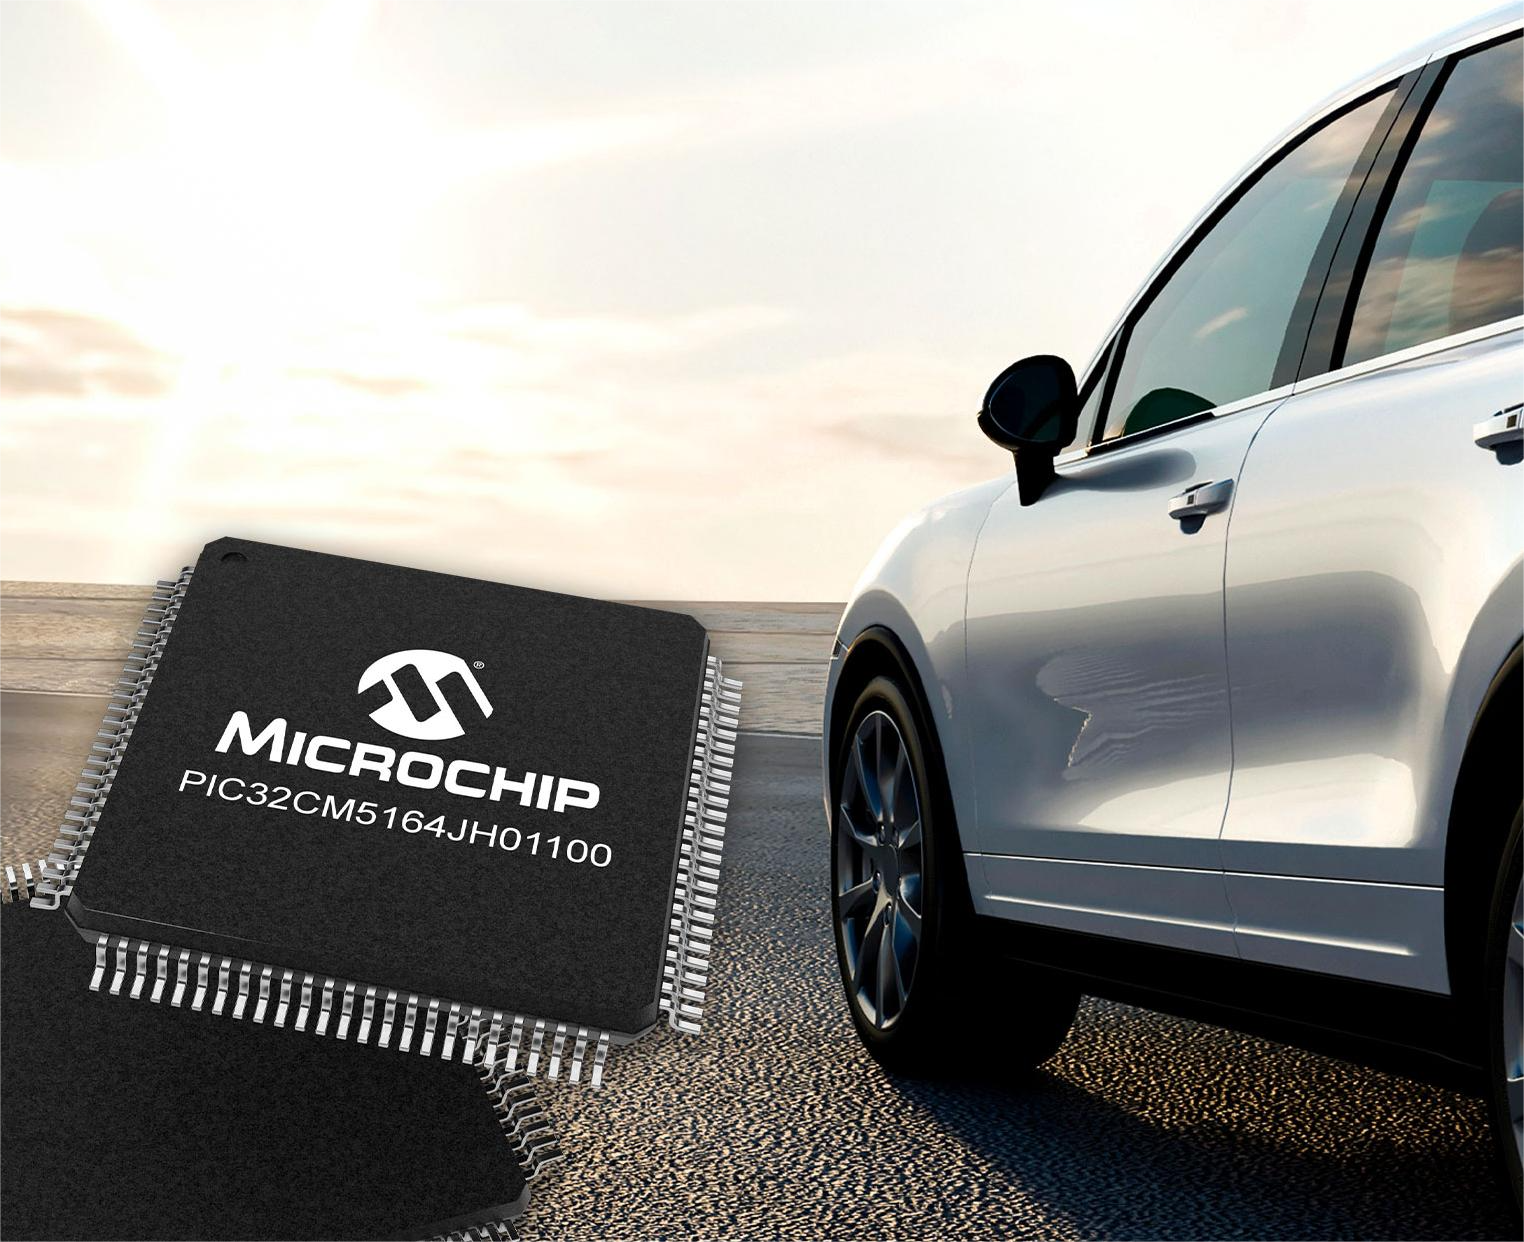 Microchip introduces PIC32CM JH, a 32-bit microcontroller based on Arm® Cortex®-M0+ core with functional safety, cybersecurity protection and AUTOSAR support